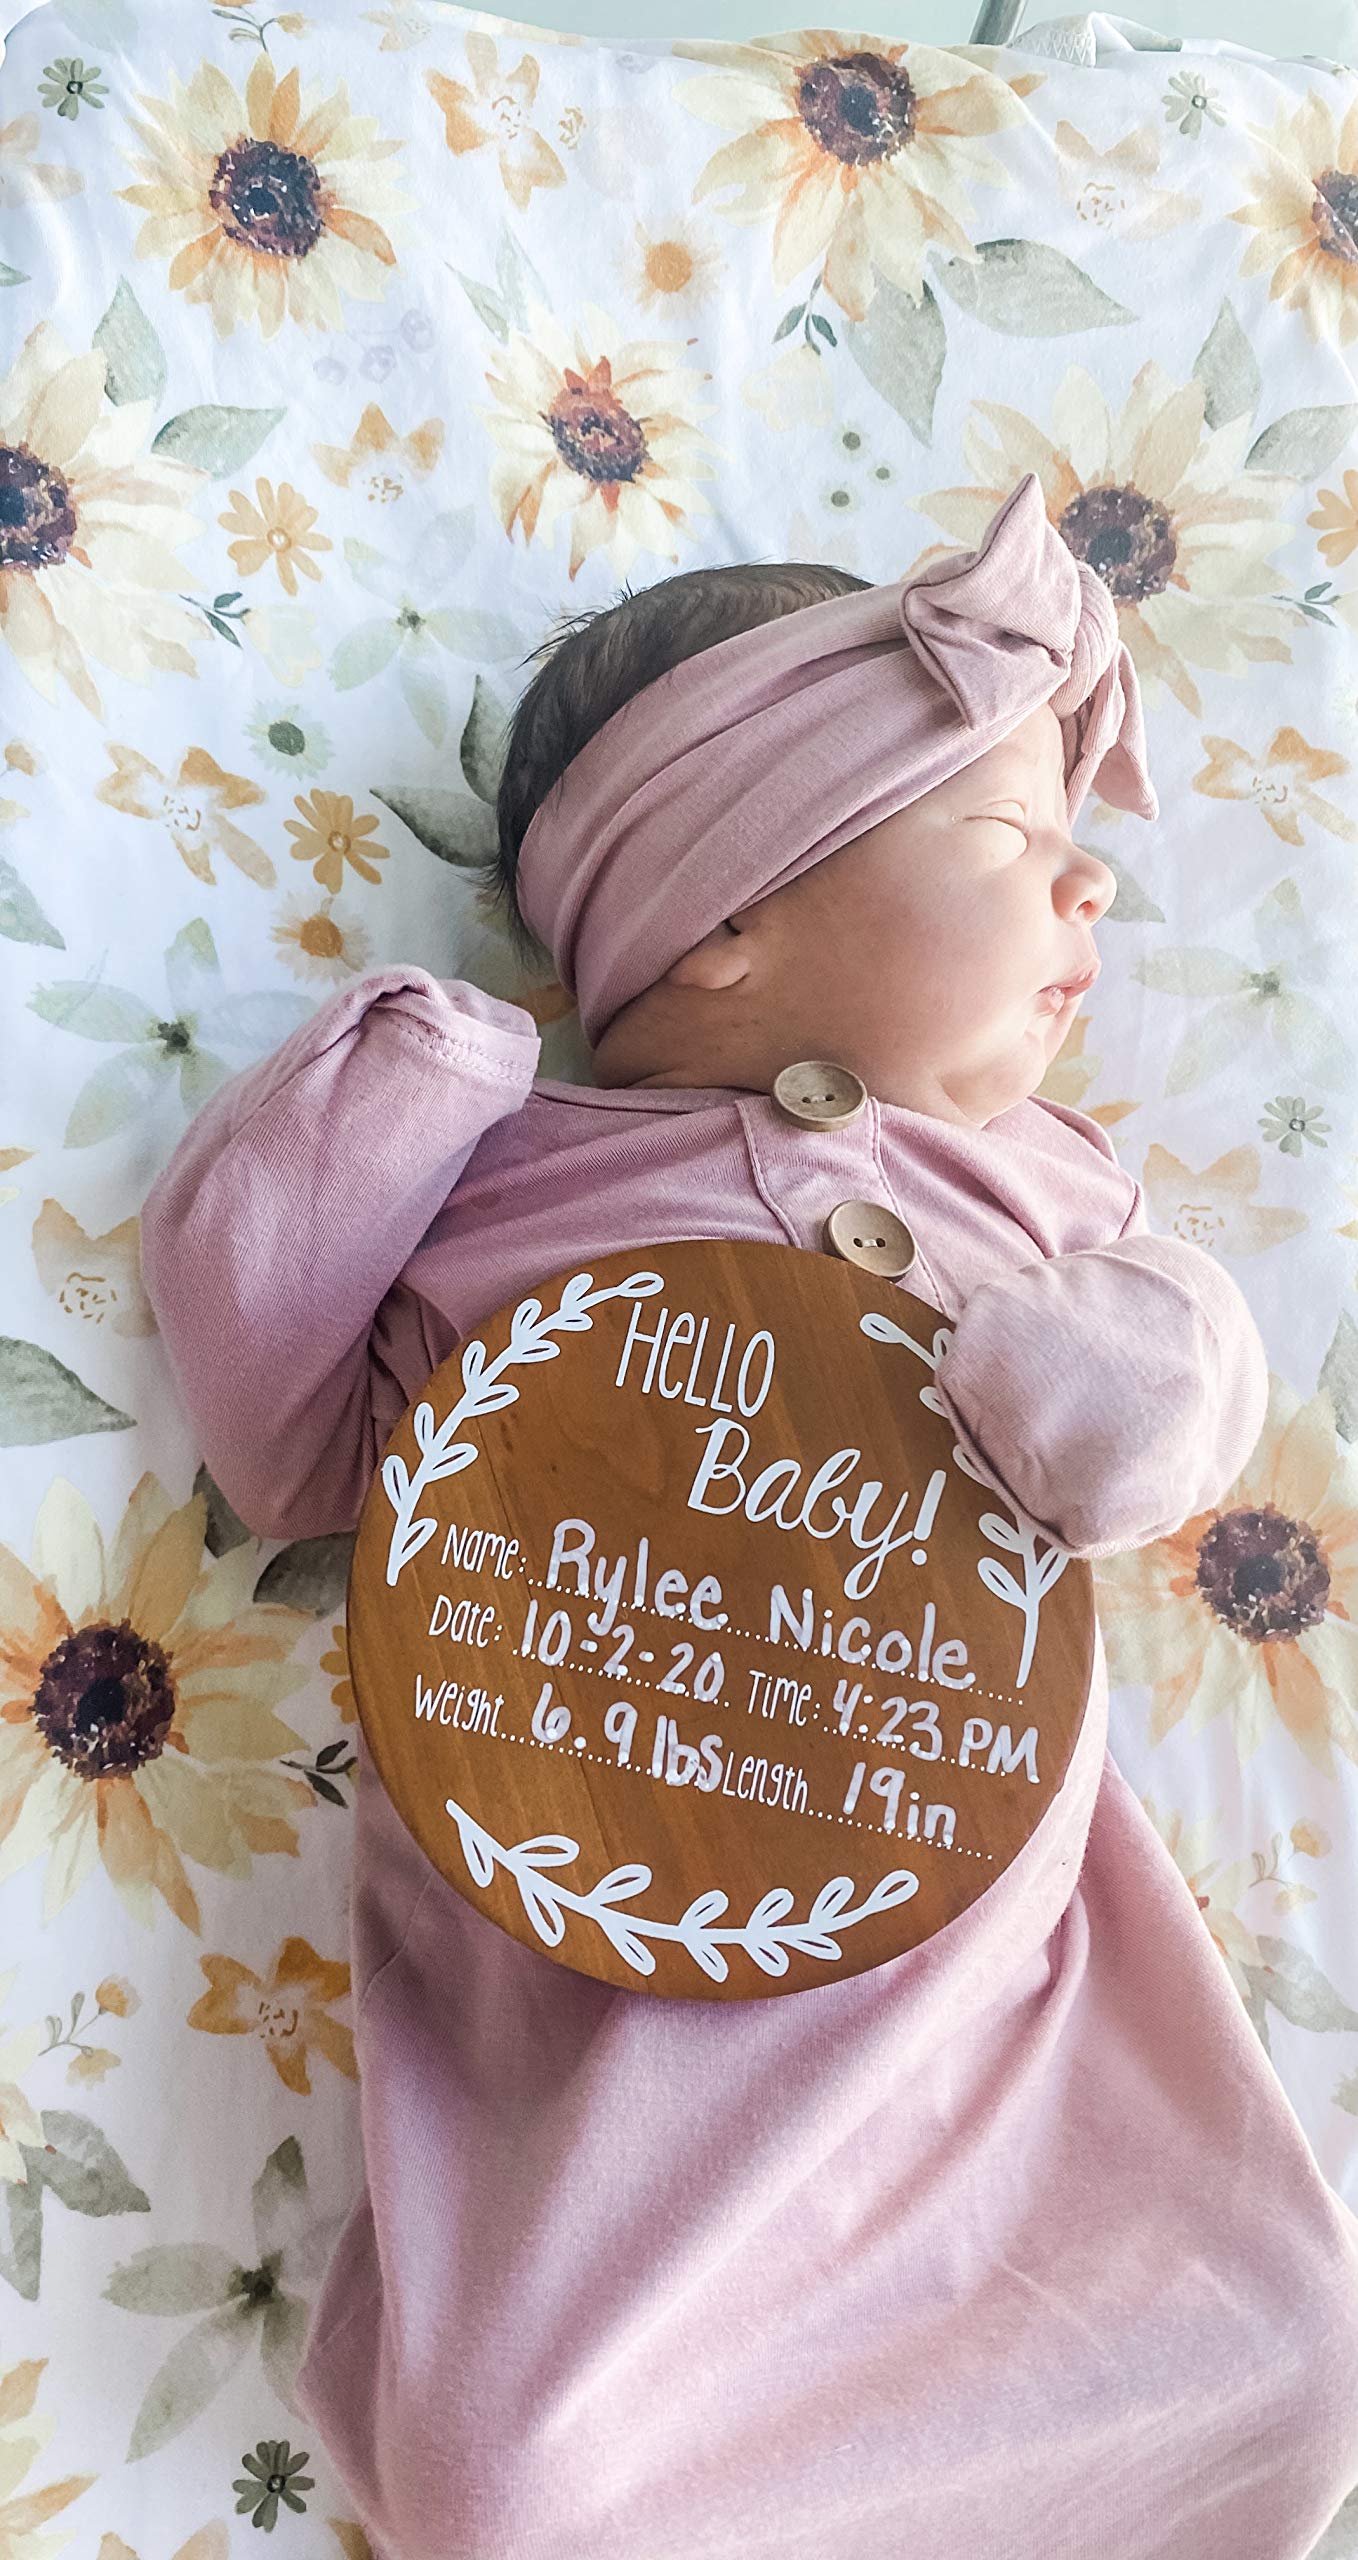 Nana's Little Angels Birth Announcement Sign 5 inch Cherry “Hello Baby” Newborn Baby Announcement Sign with White Paint Marker Wooden Disc Baby Announcement for Hospital Pictures & Photo Prop…